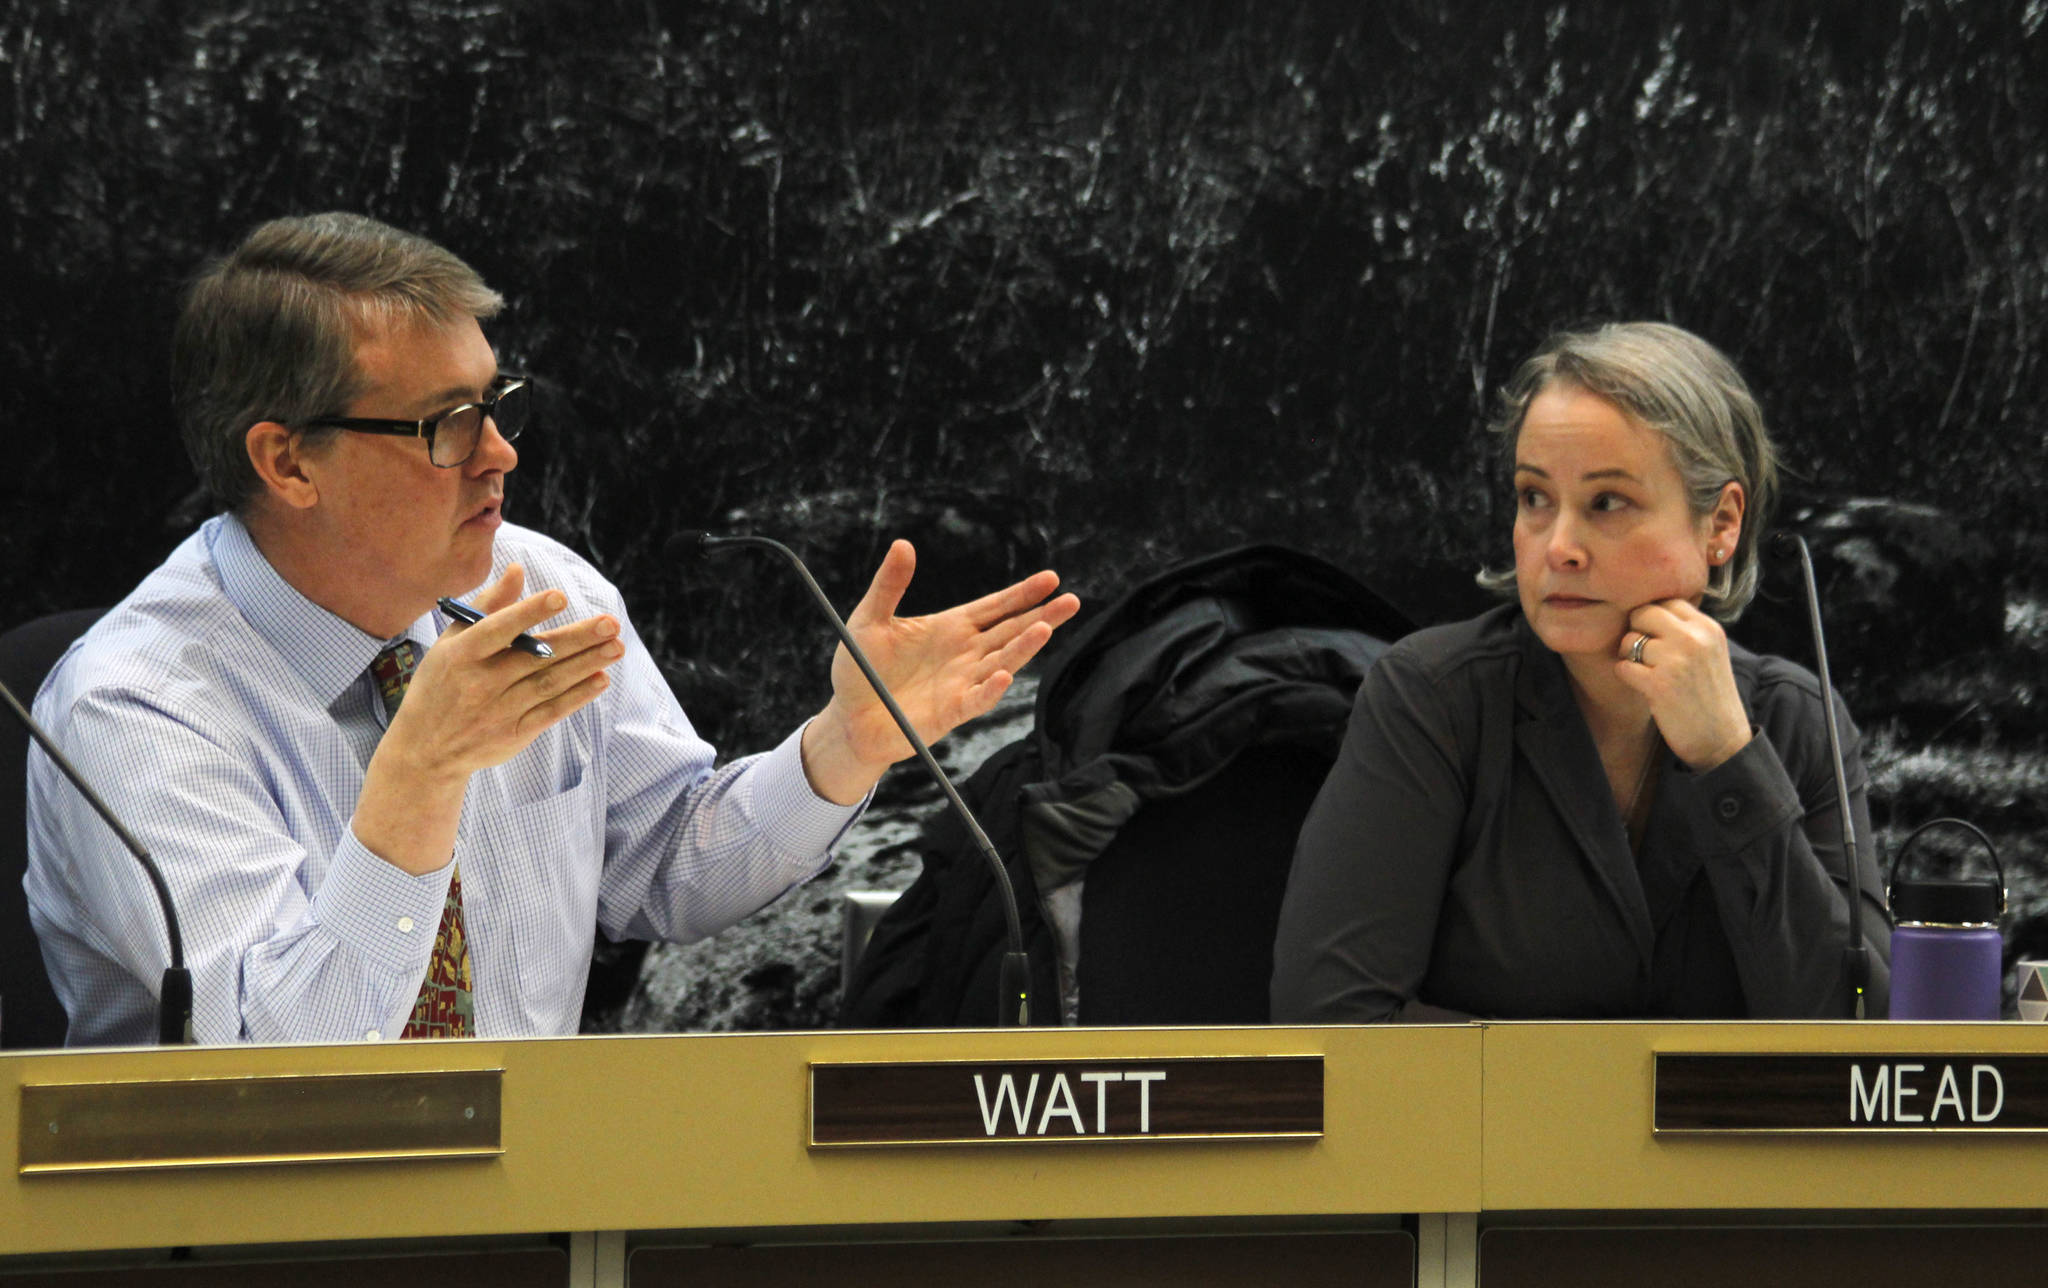 City Manager Rorie Watt (left) speaks as City Attorney Amy Mead listens during the Monday, Feb. 5, 2018 Committee of the Whole meeting. Watt will enter into negotiations with Alaska Electric Light & Power about the city’s priorities during Canadian company Hydro One’s purchase of AEL&P’s parent company, Avista Corp. If the Assembly decides to intervene in the process, Mead will head up that process. (Alex McCarthy | Juneau Empire)